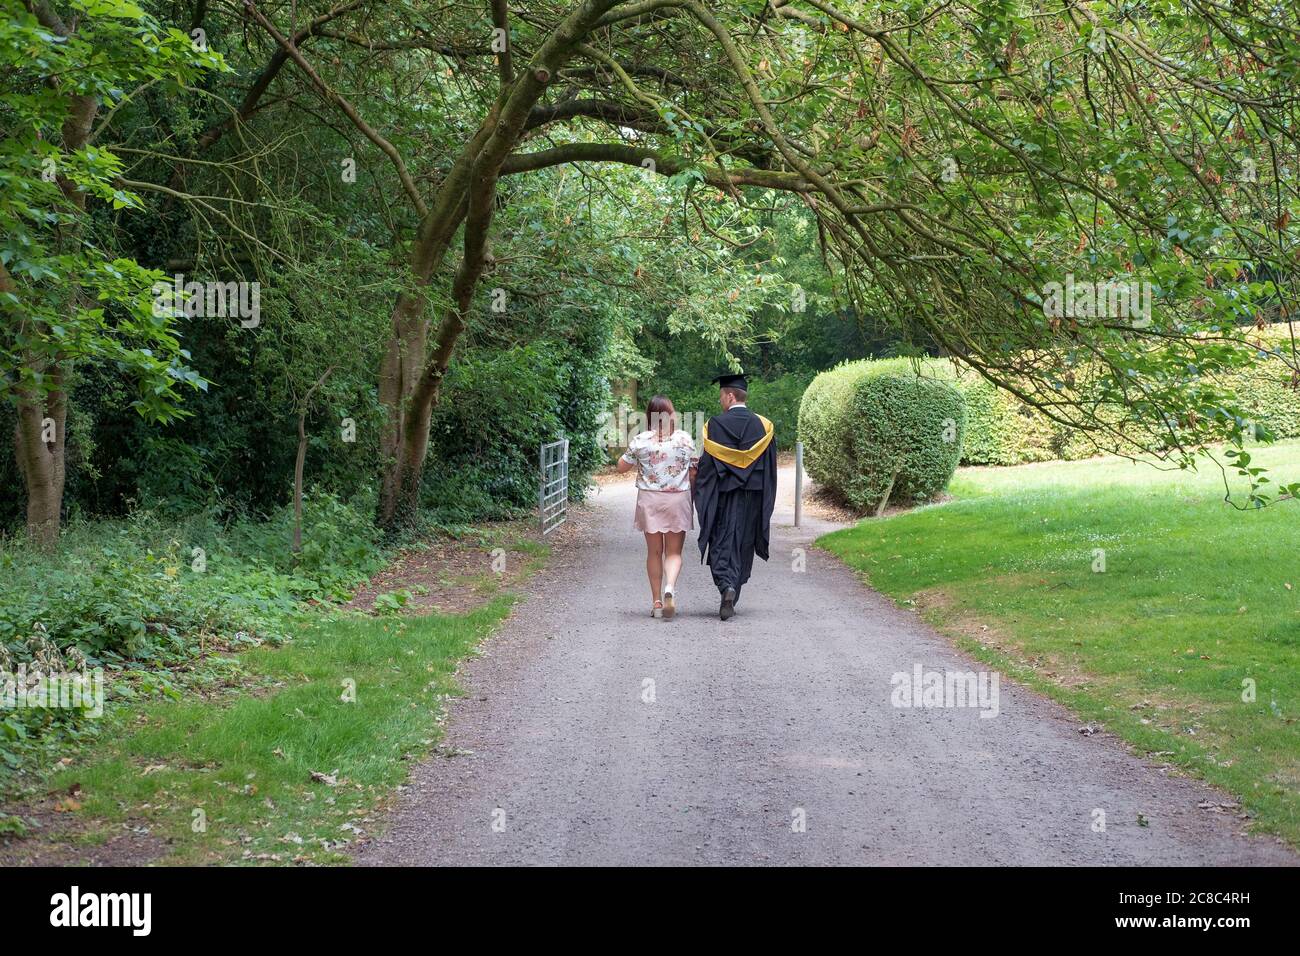 Young couple seen walking in the grounds of a famous UK university. The man is seen wearing his graduation gown and mortar board/ Stock Photo